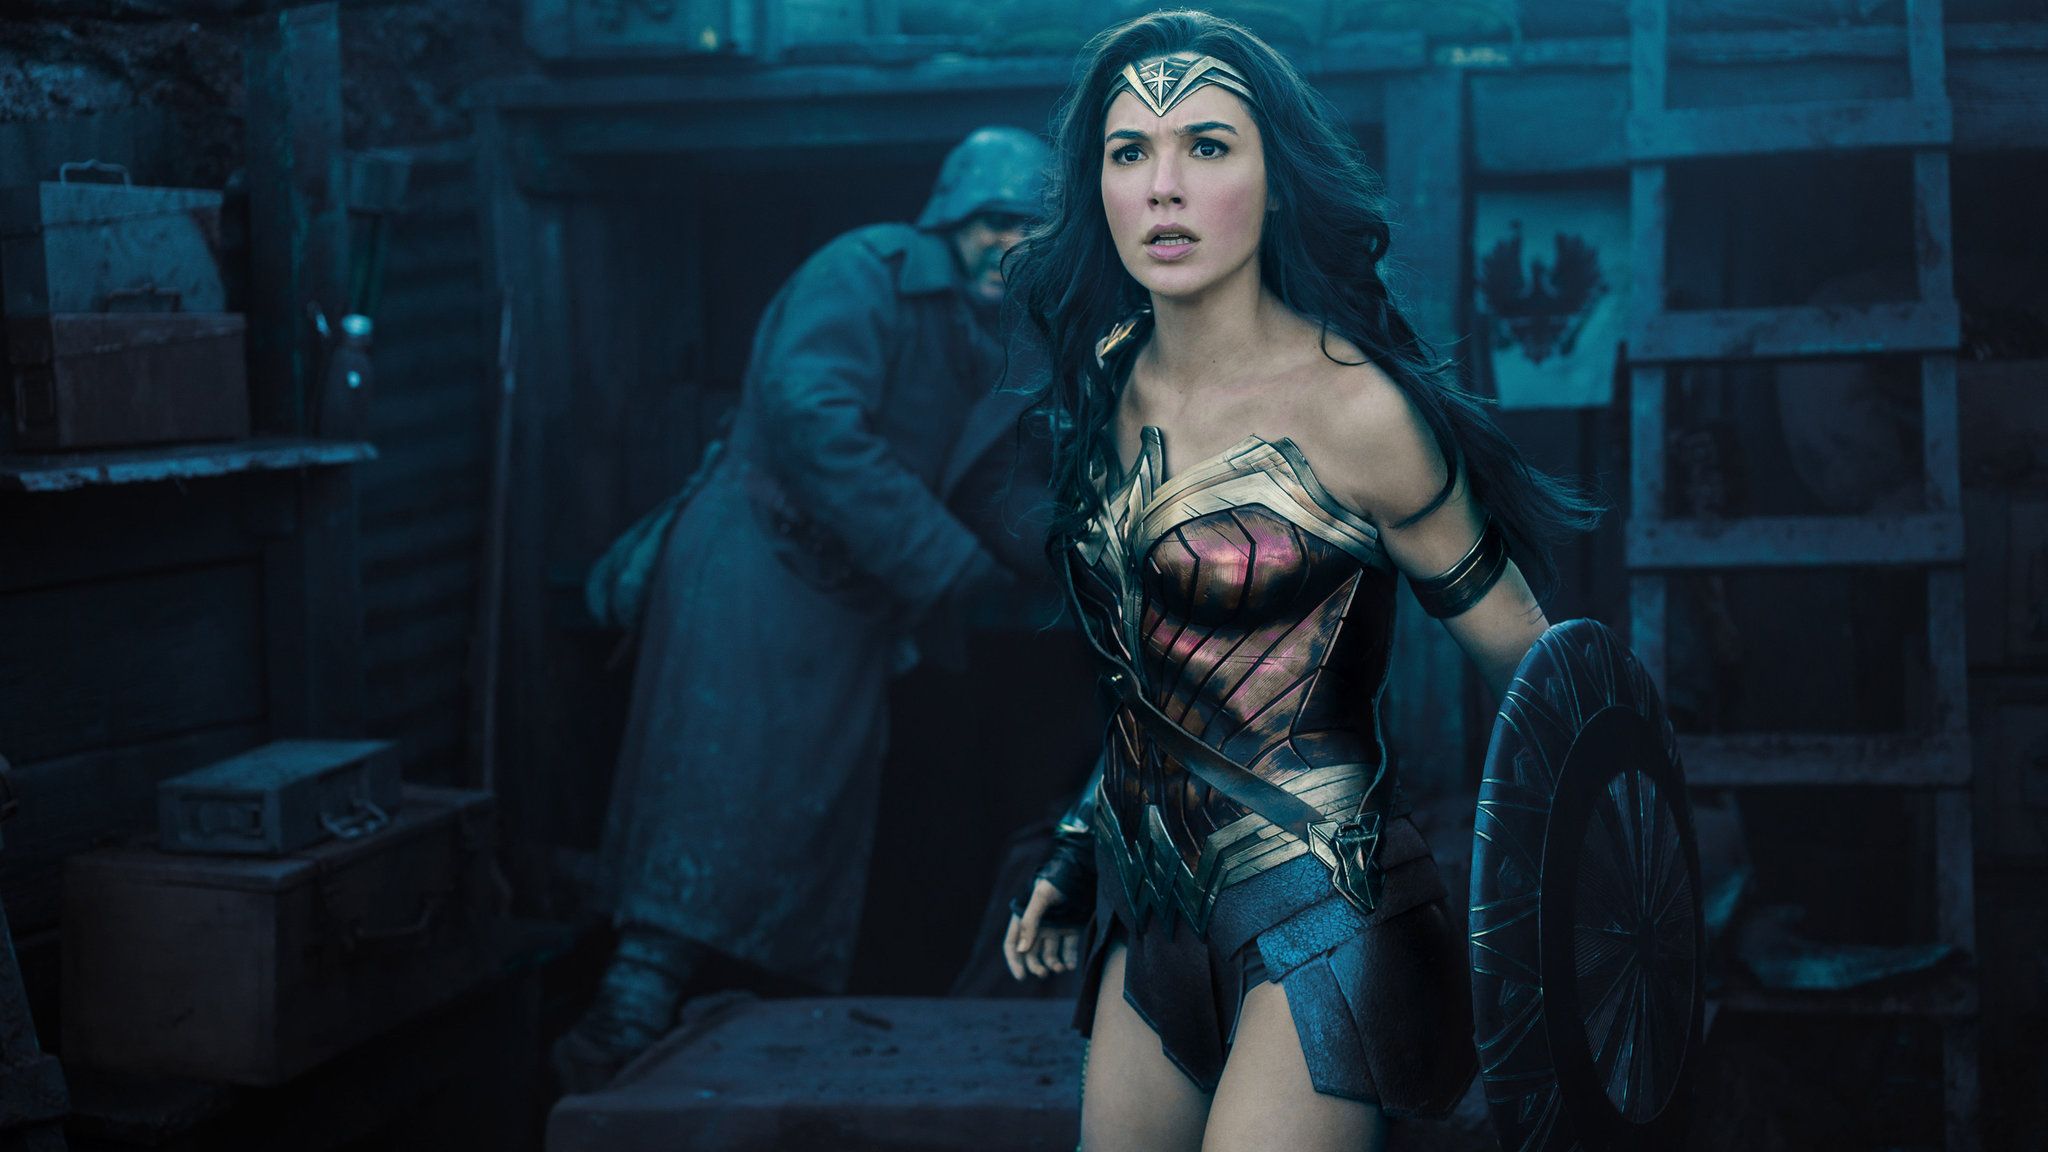 Can Gal Gadot Make Wonder Woman a Hero for Our Time?